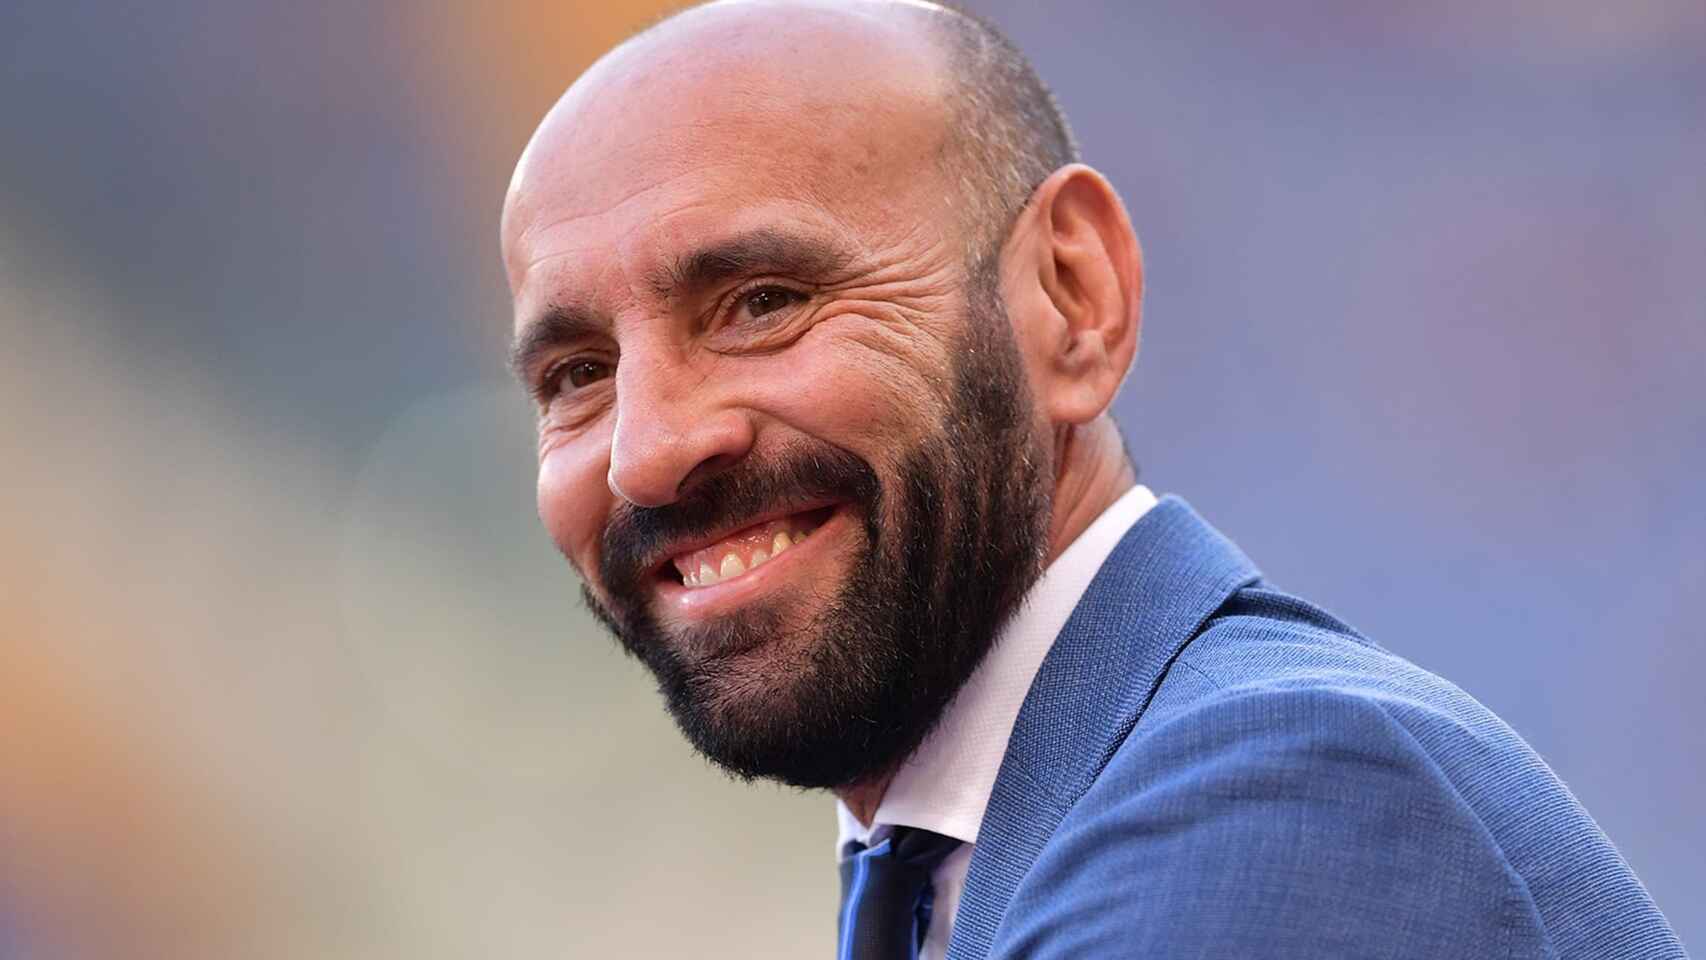 Monchi's masterful move secures two cracks for Sevilla FC
